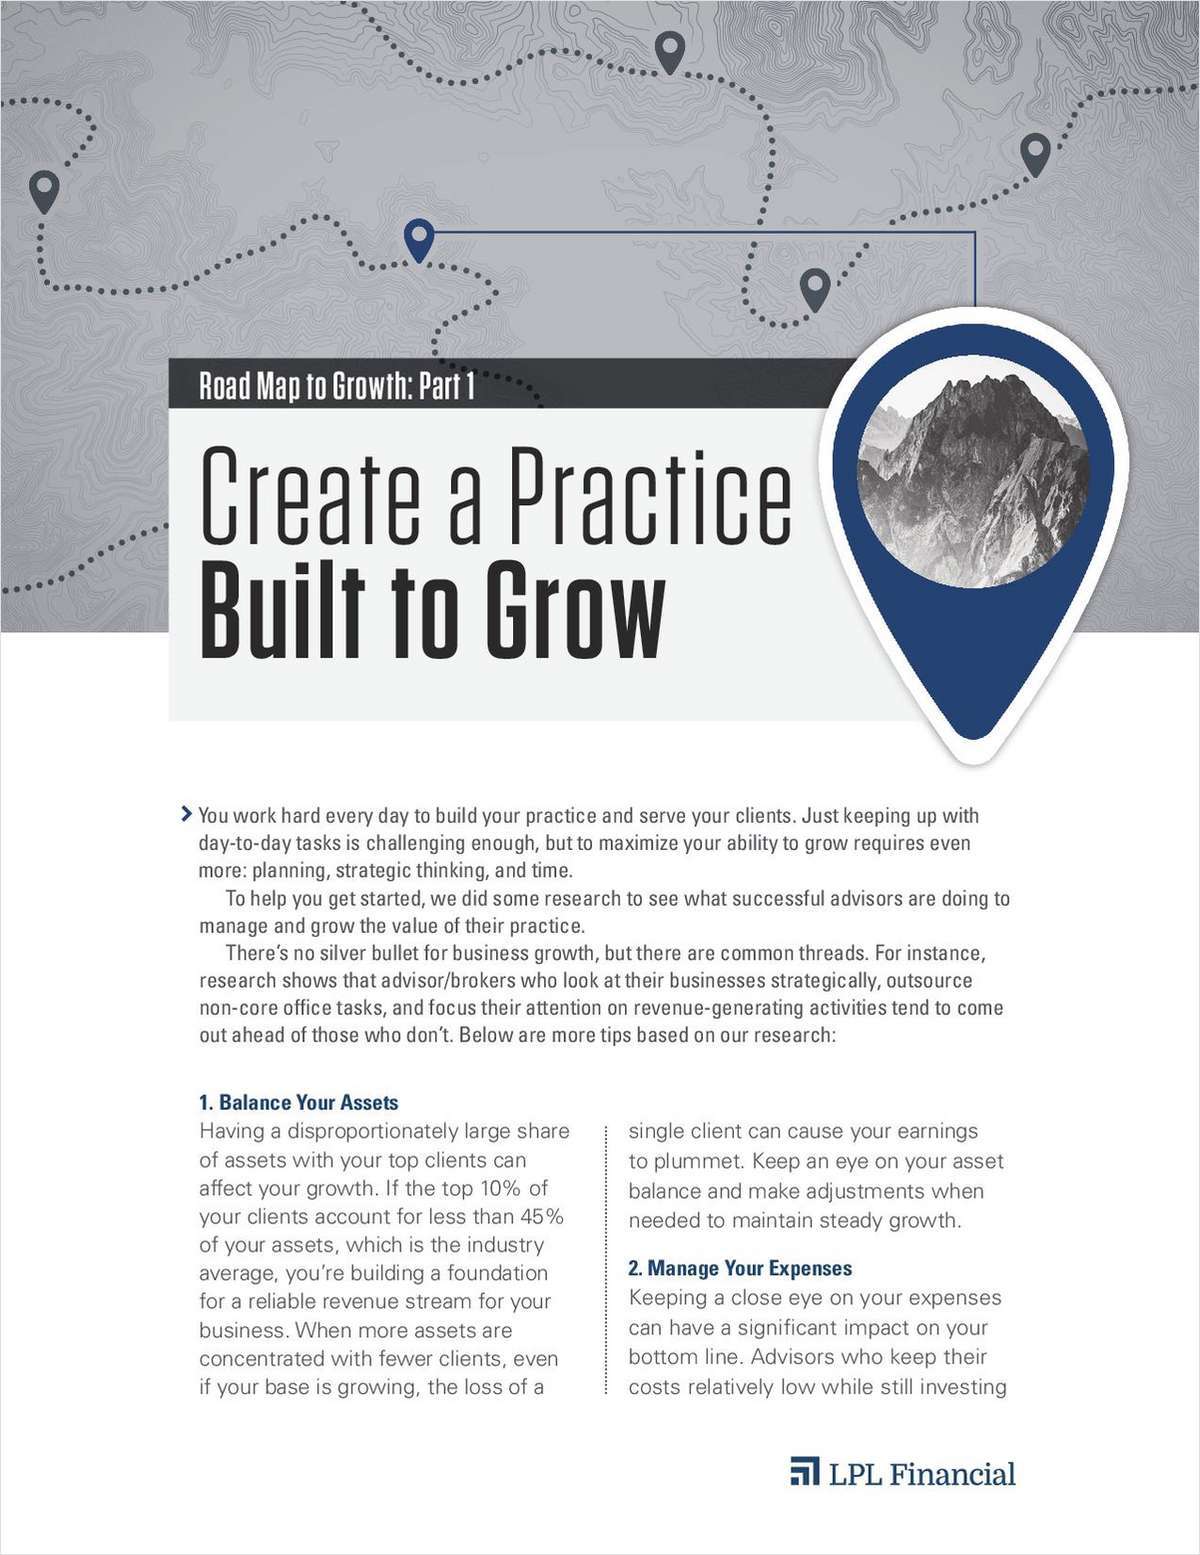 10 Strategies to Create a Practice Built to Grow